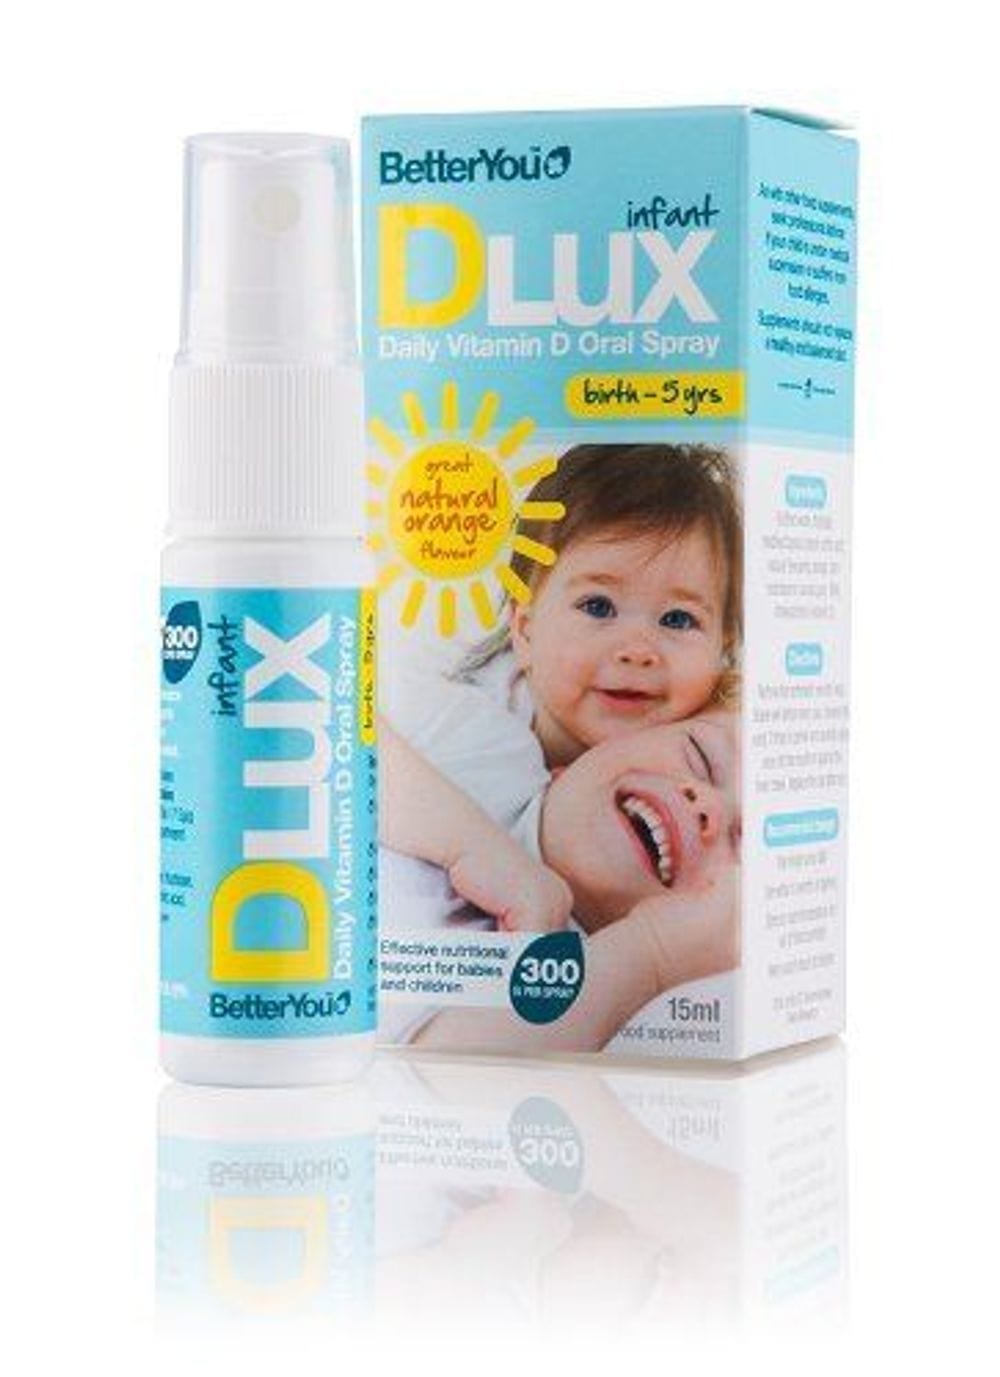 Better You D Lux Infant Vitamin D Oral Spray 15ml (Pack of 2) TapClickBuy